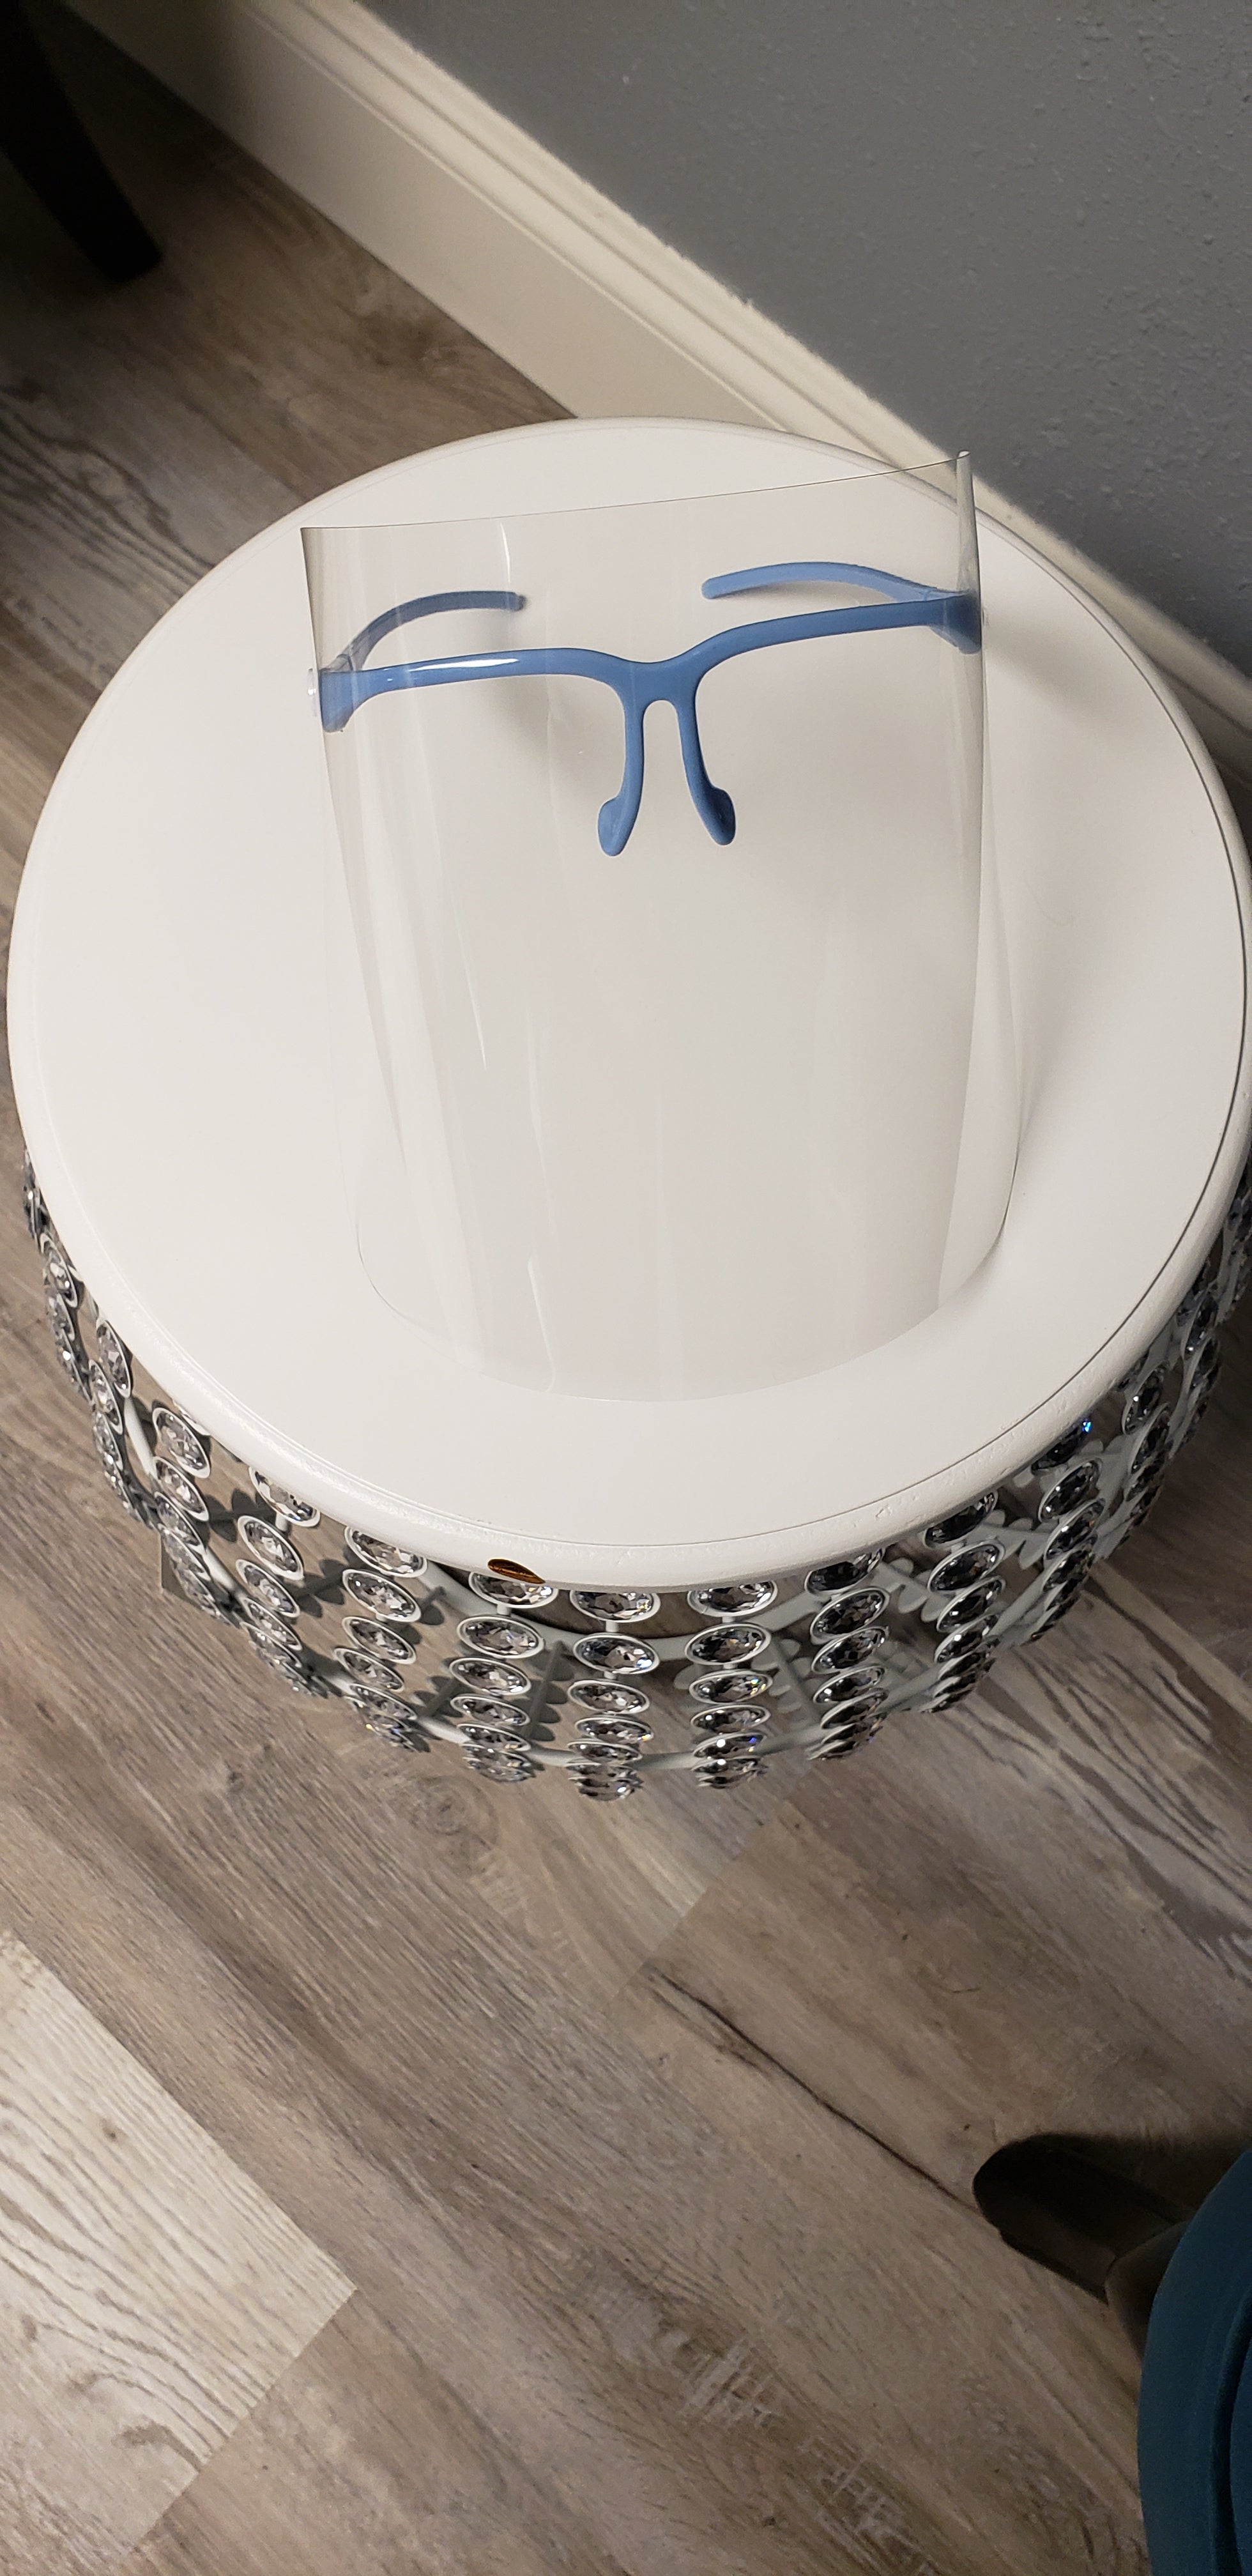 FACE SHIELD WITH COLOR GLASSES - Feelin' Myself Boutique